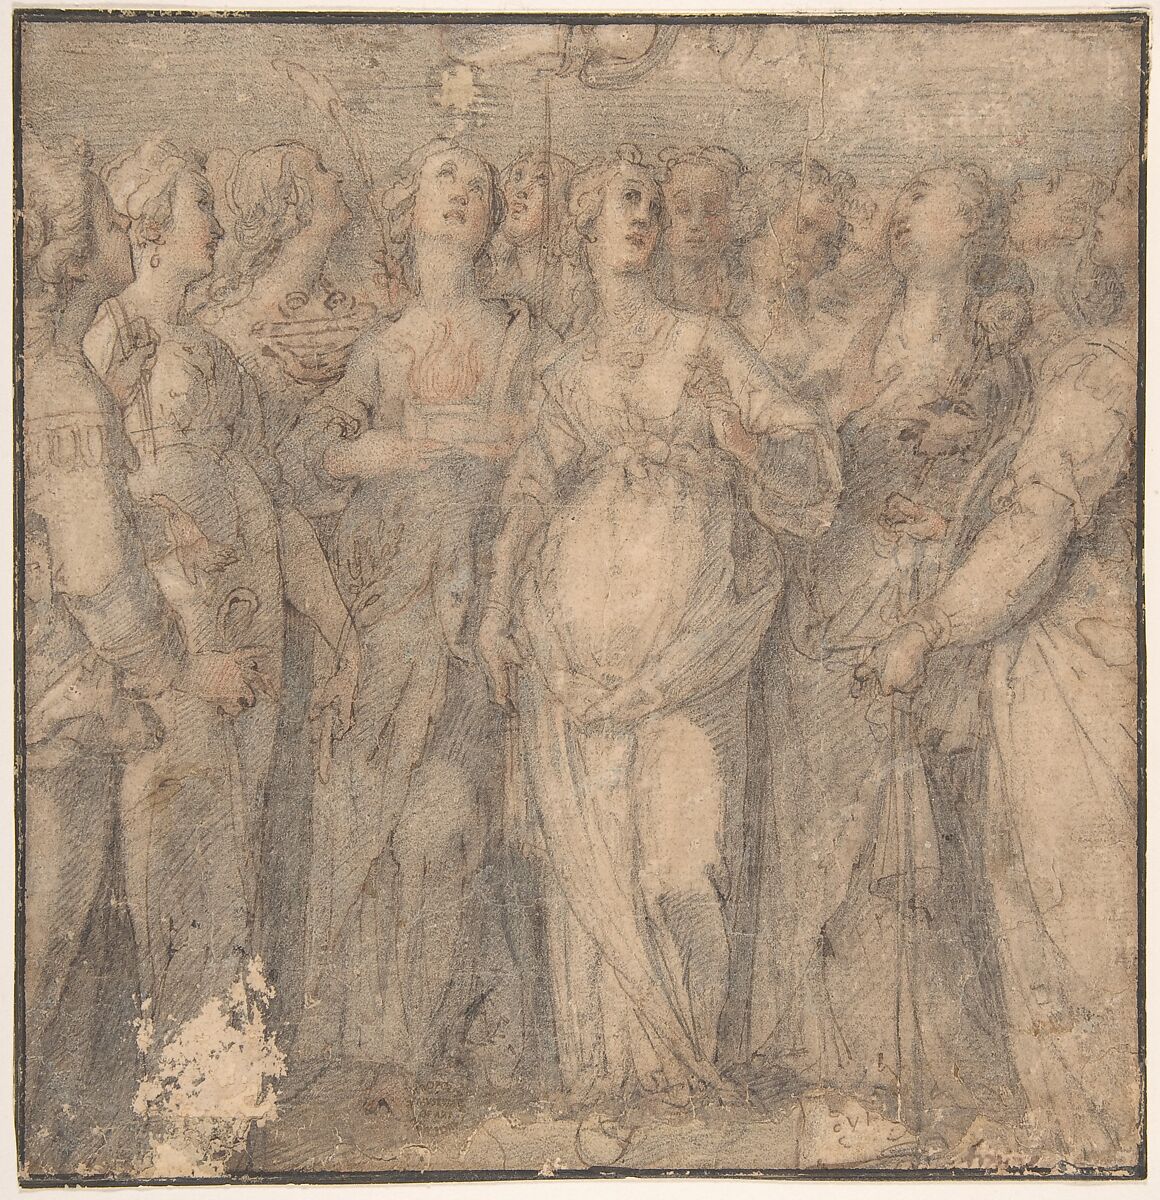 Group of Standing Female Saints (the Holy Virgins), Anonymous, Italian, 16th to 17th century, Pen and brown ink outlines, over red chalk underdrawing, and rendering of shadows in soft grayish black chalk, on light brown paper; framing outlines in pen and dark brown ink 